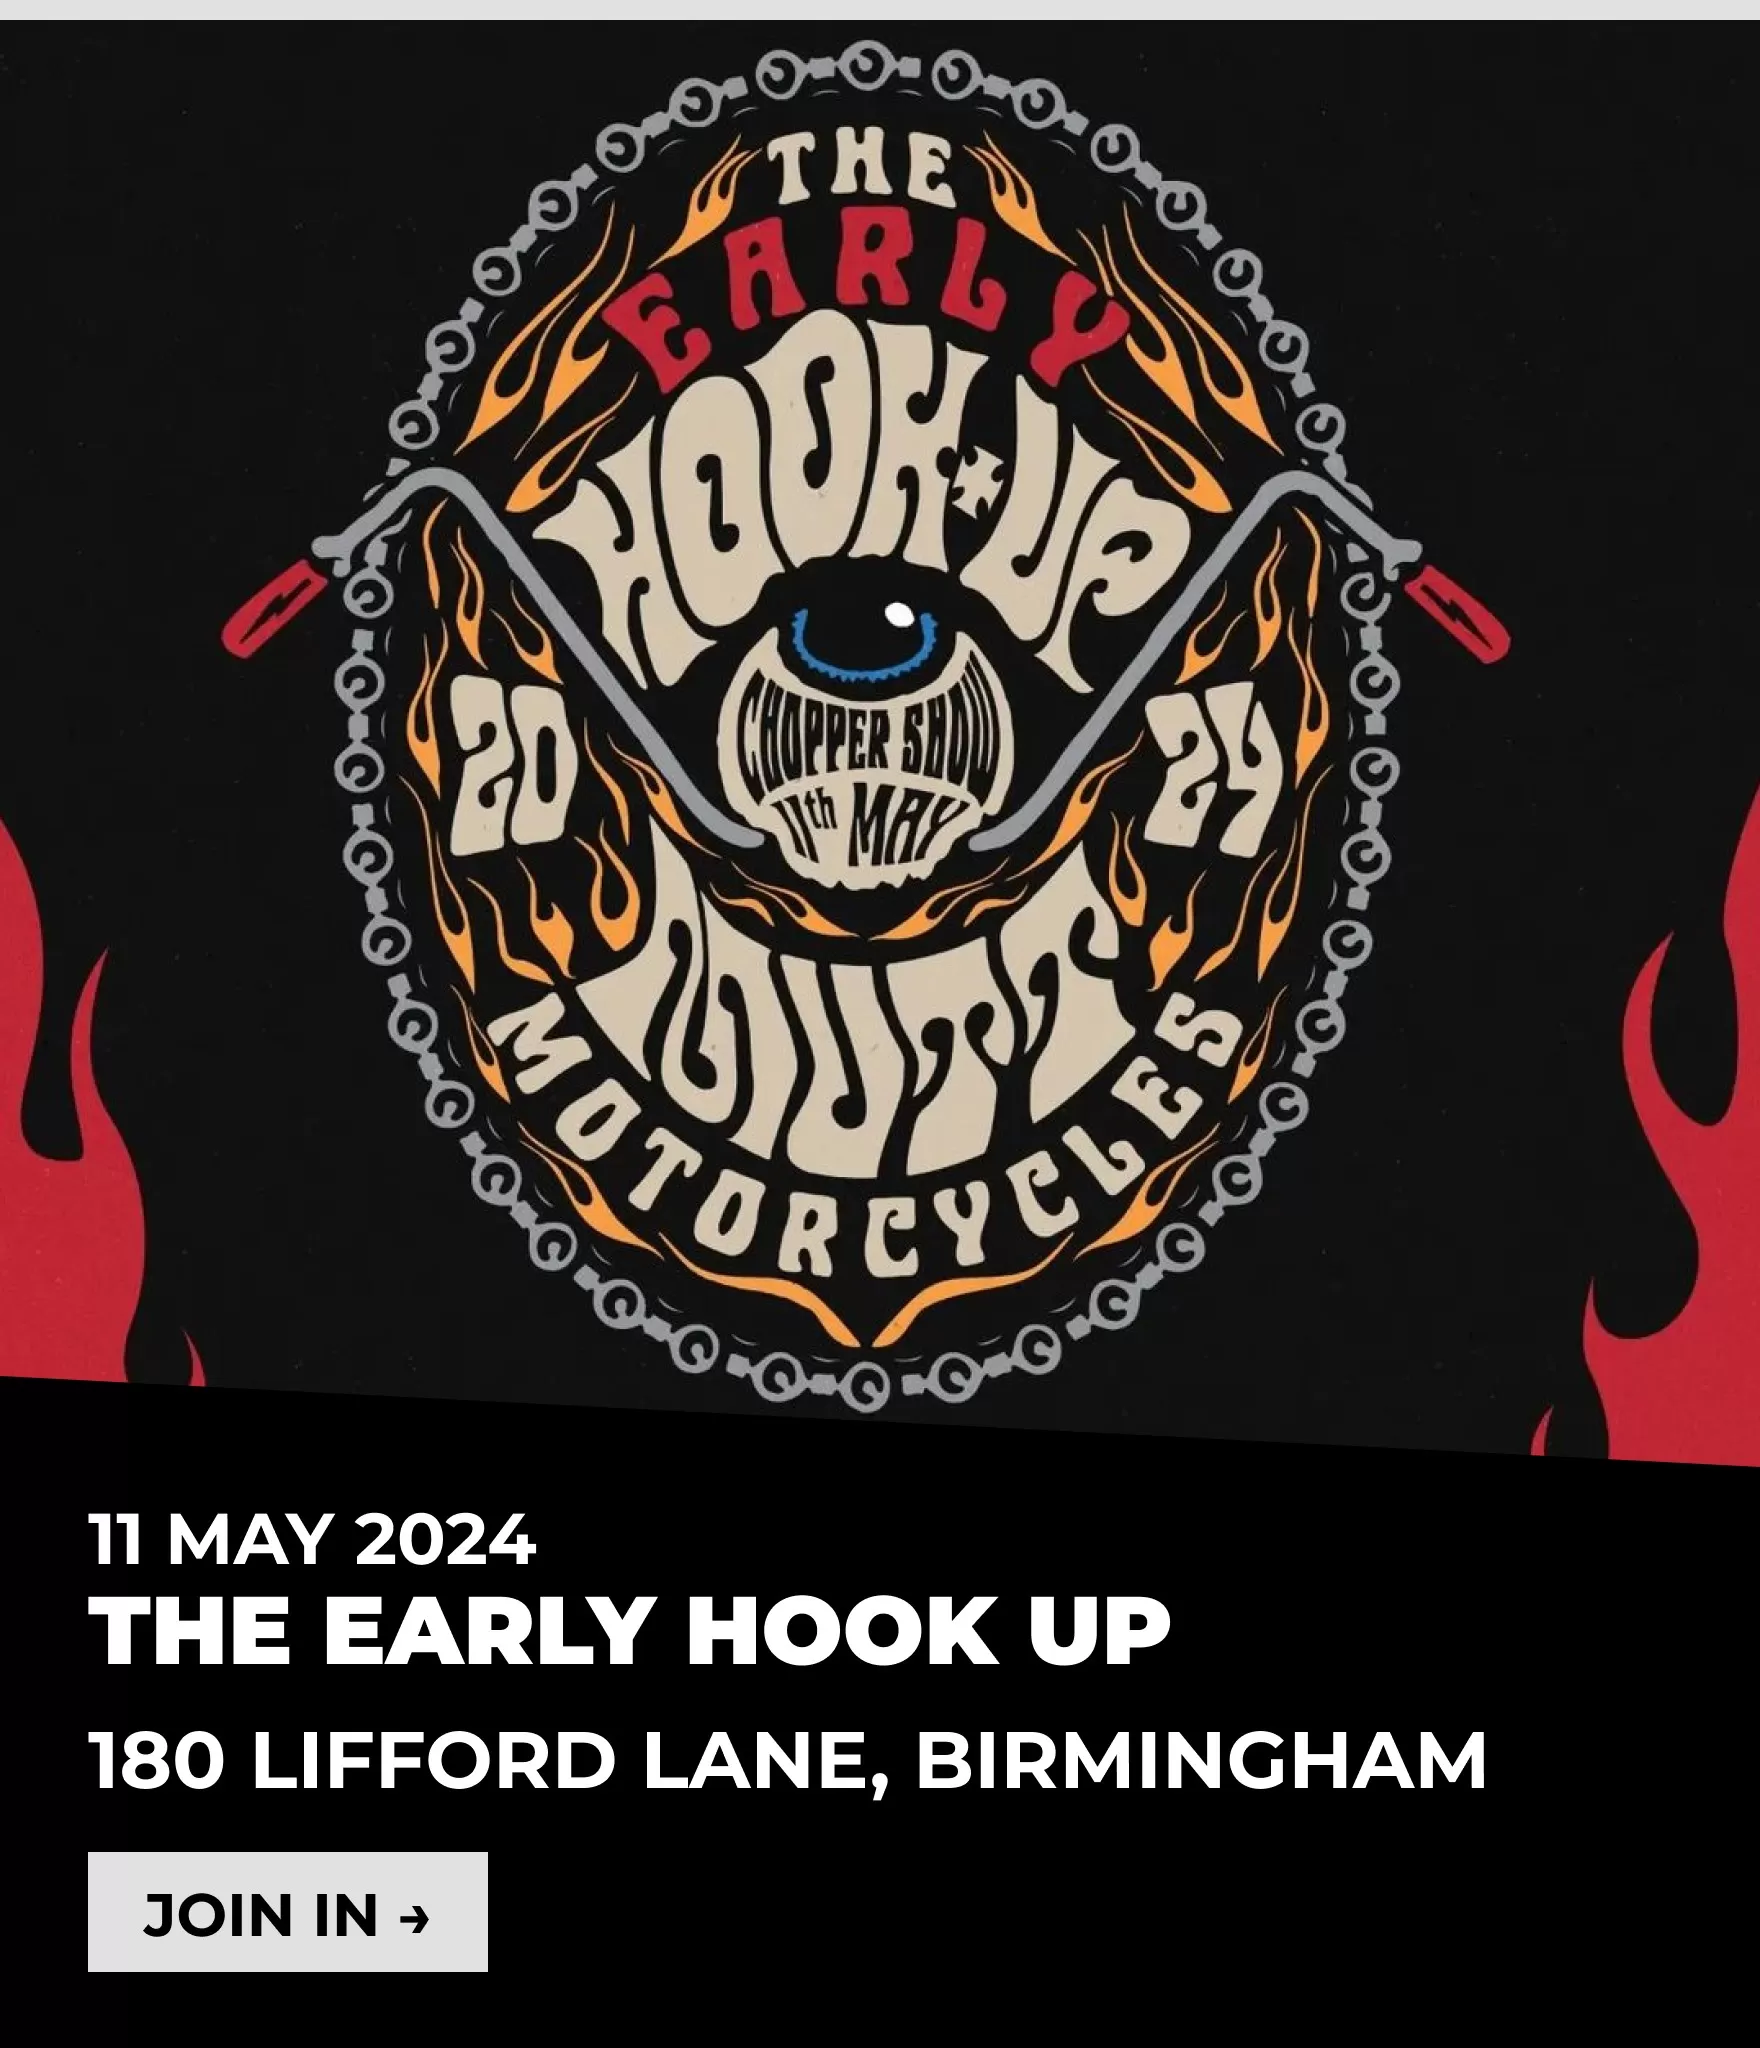 11 May The Early Hookup Mutt Motorcycles